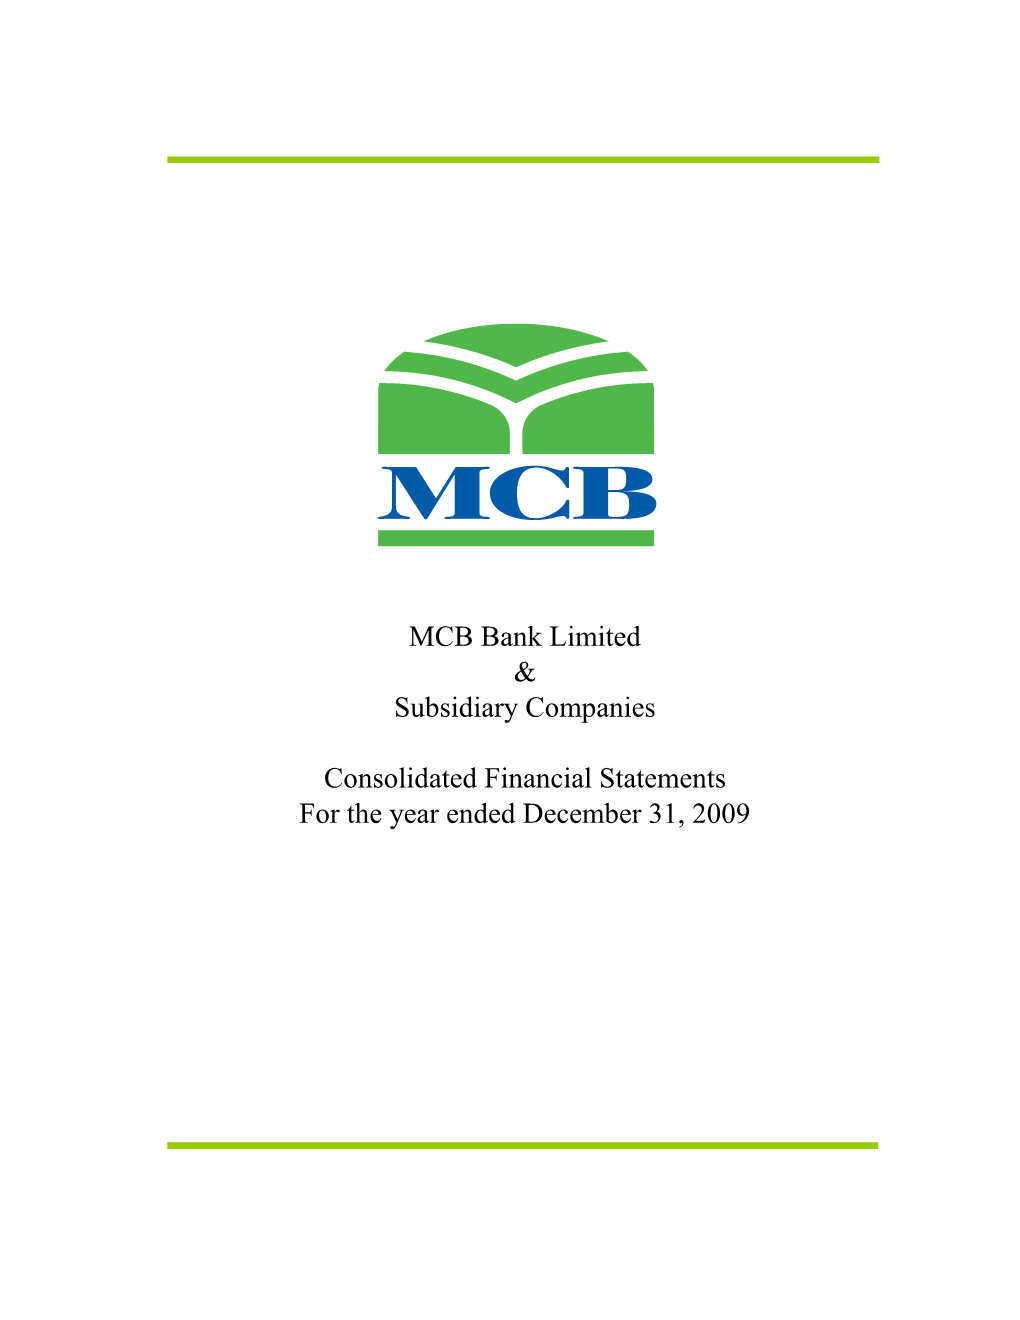 MCB Bank Limited & Subsidiary Companies Consolidated Financial